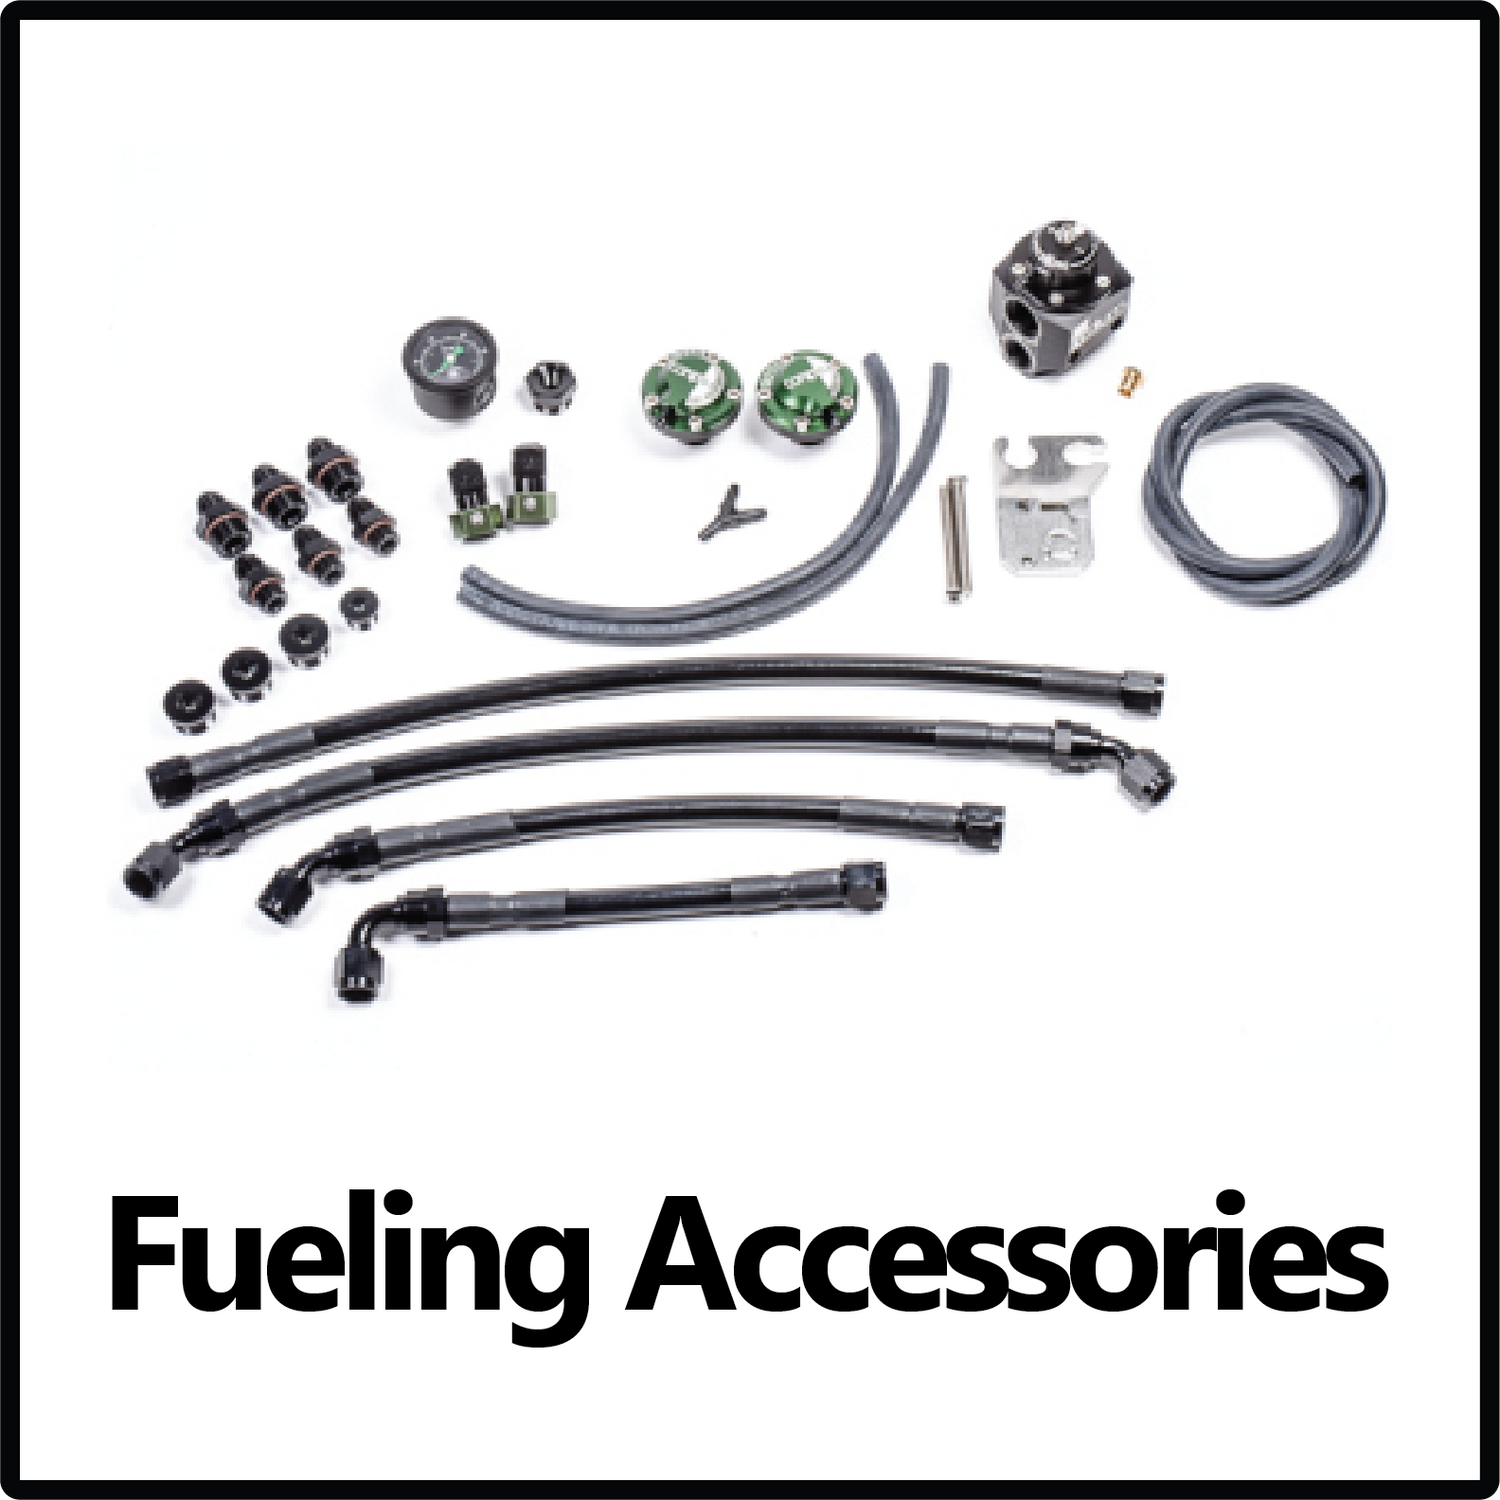 Fueling Accessories